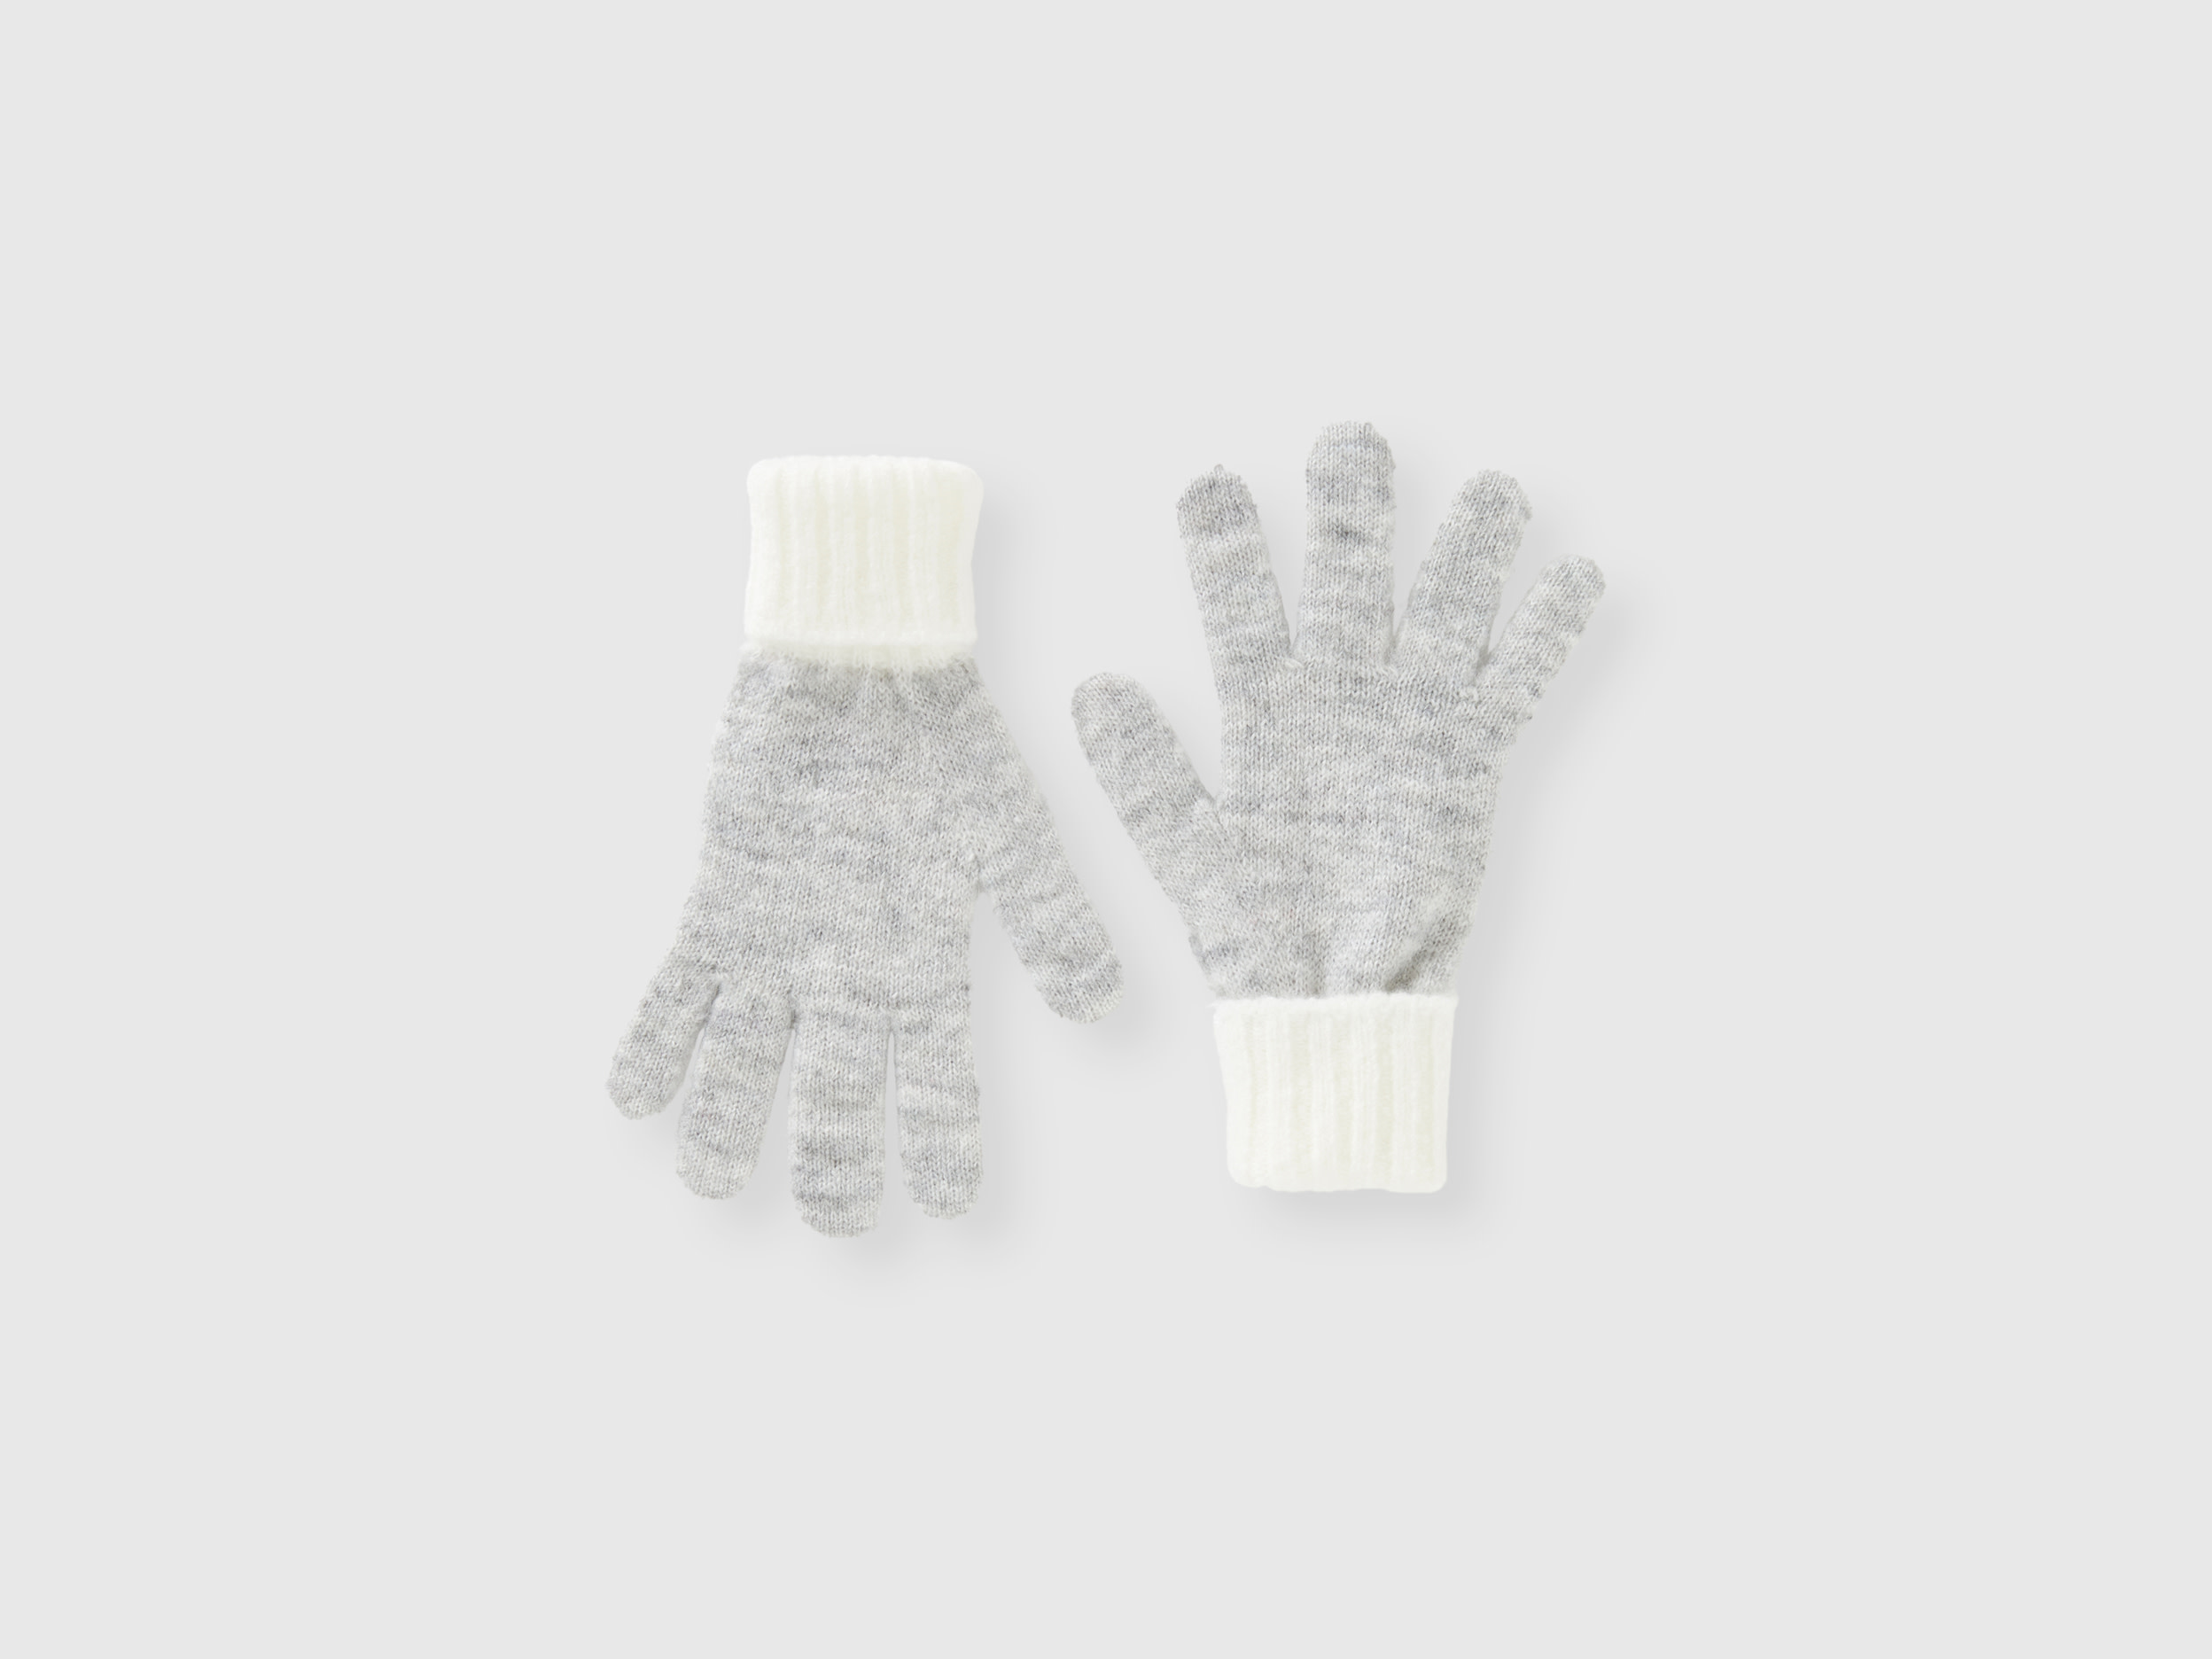 Benetton, Knitted Gloves, size S-L, Gray, Kids